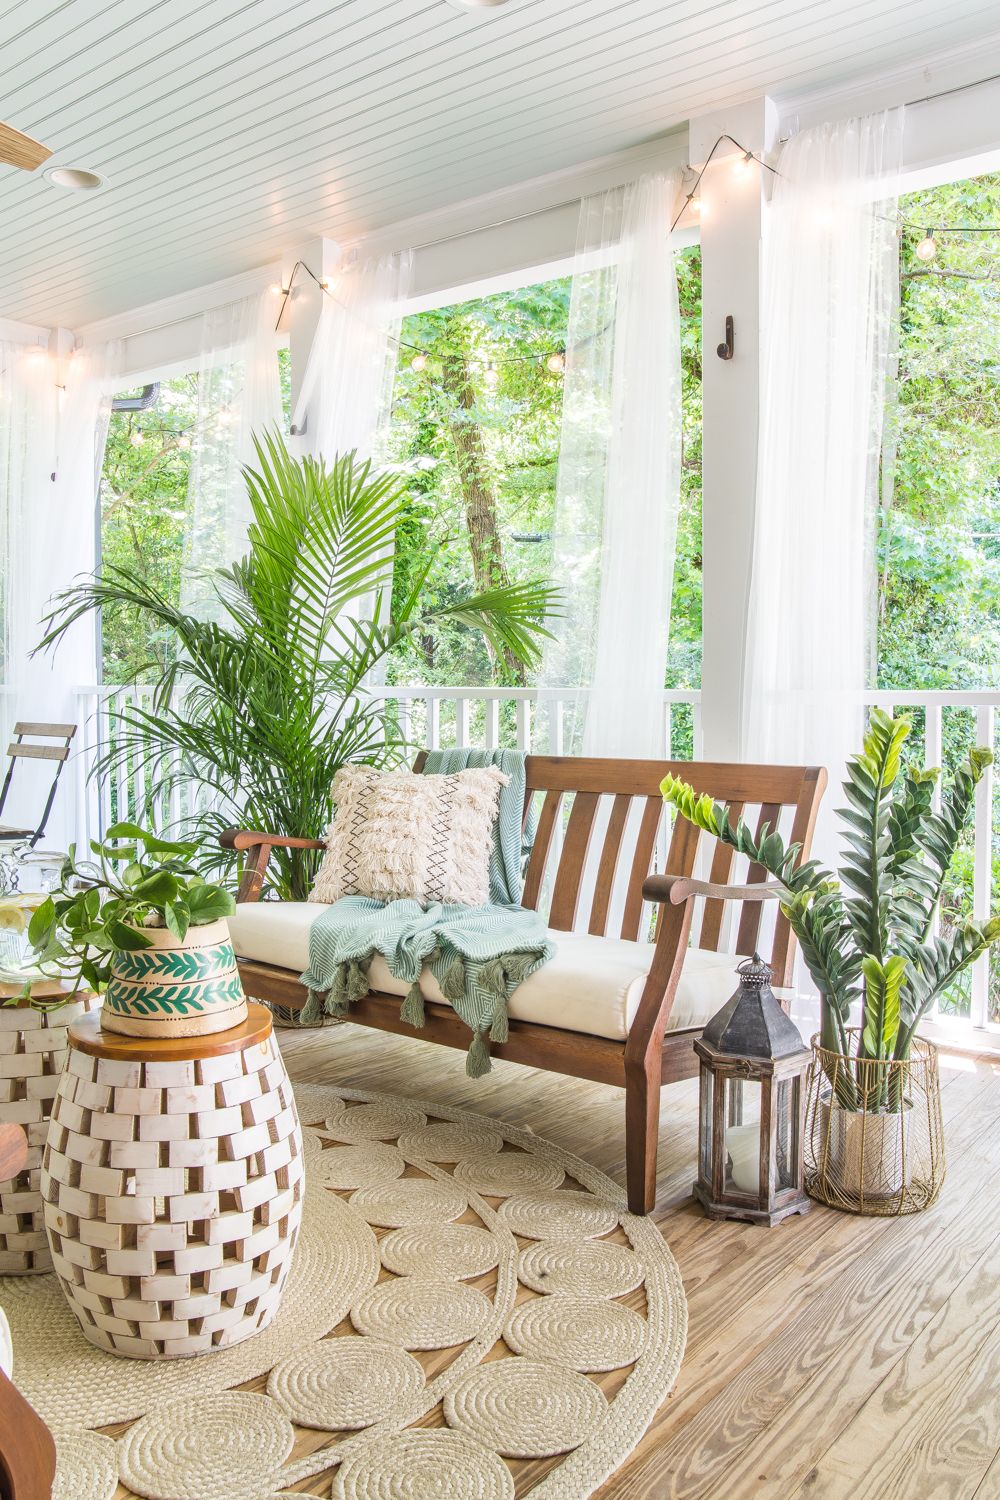 Front Porches Furniture Ideas To Inspire
You